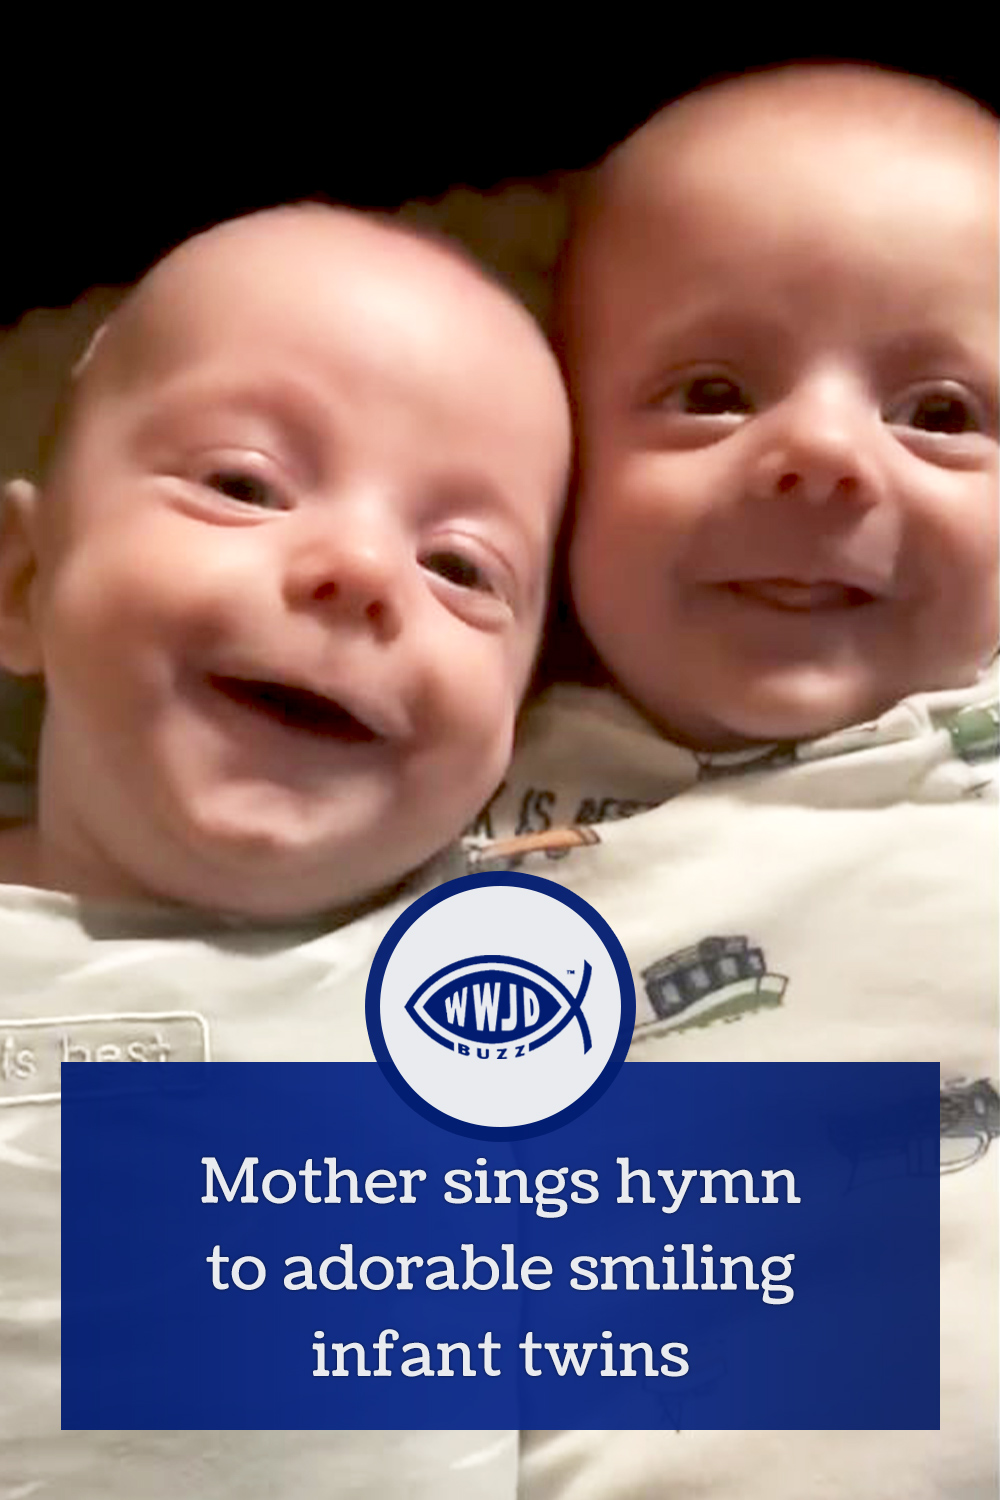 Mother sings hymn to adorable smiling infant twins